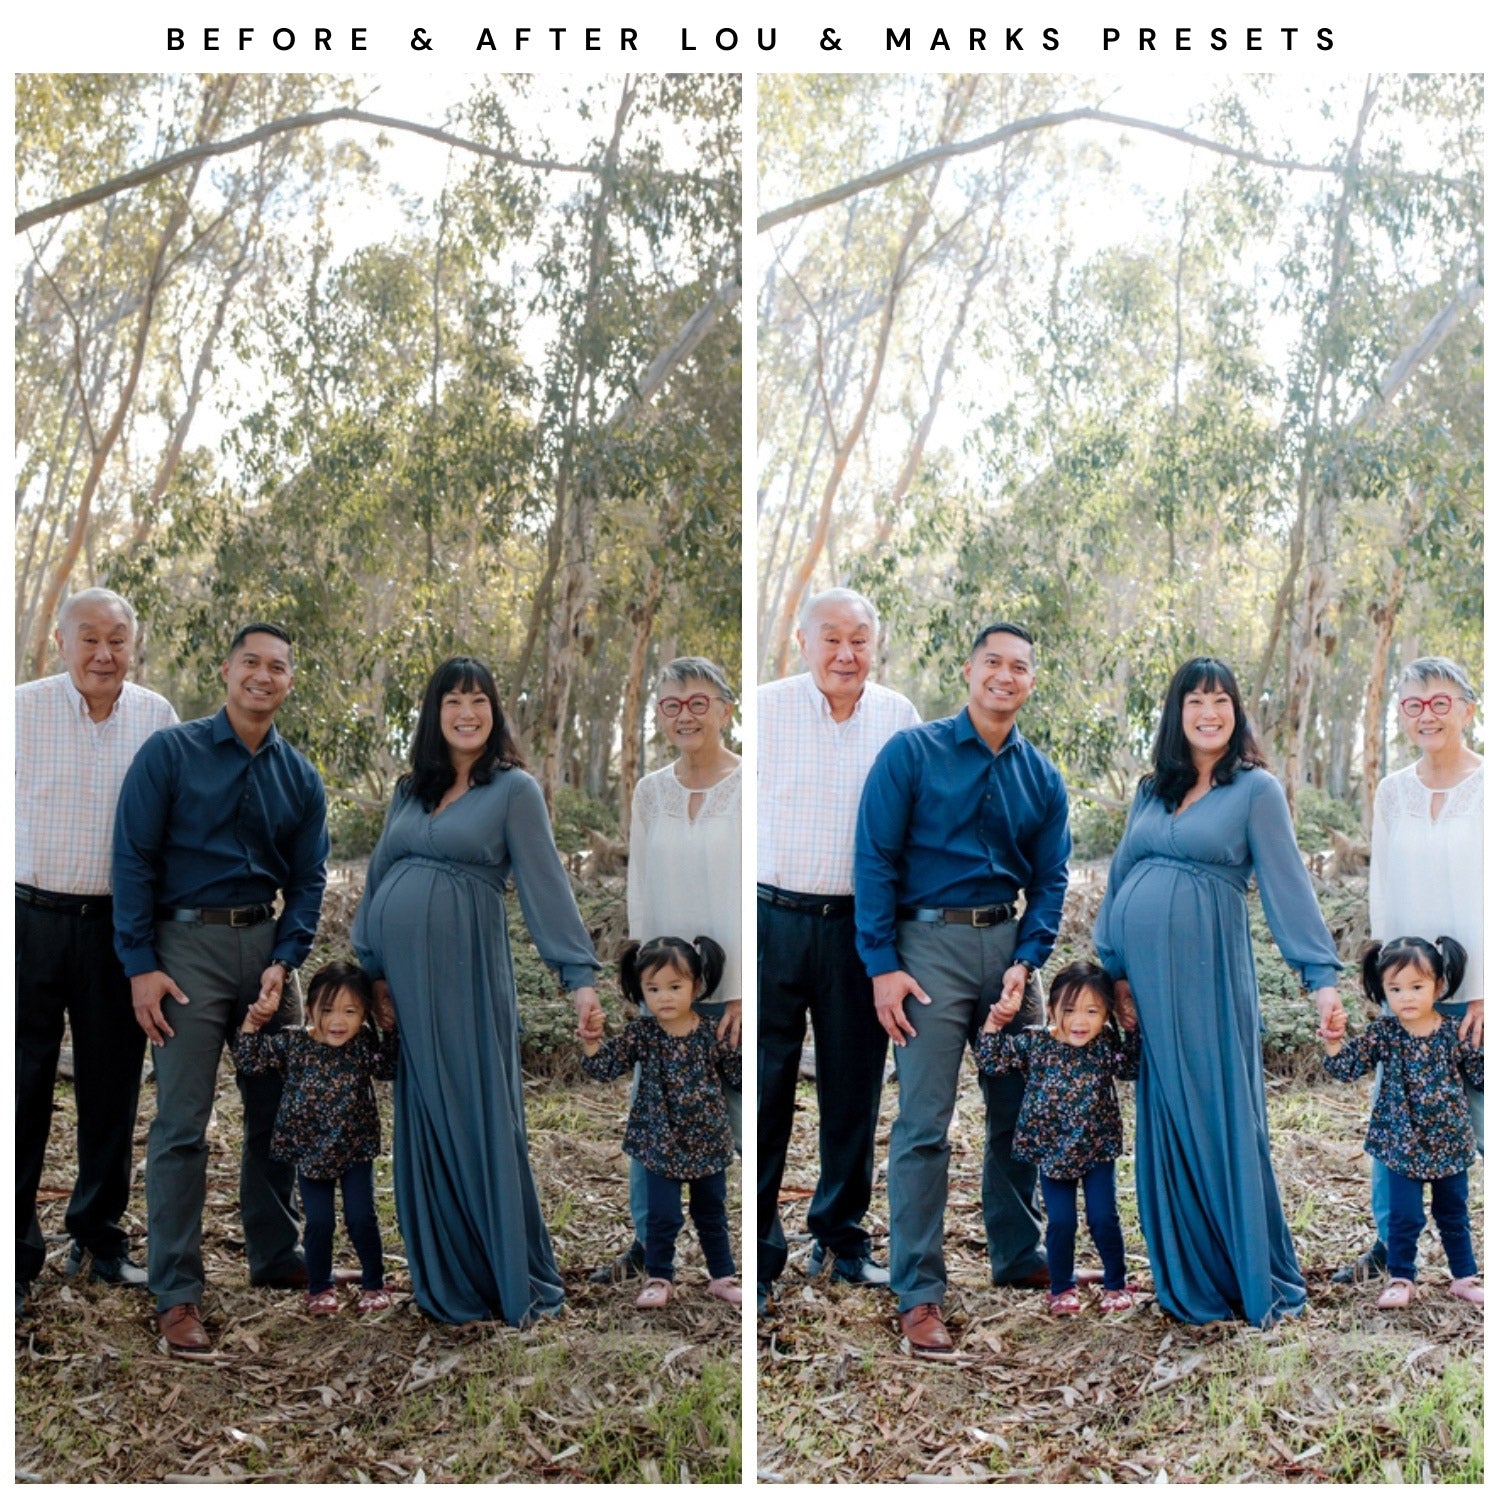 Lou & Marks Presets Light And Airy Lightroom Presets Bundle The Best Presets Family Photos